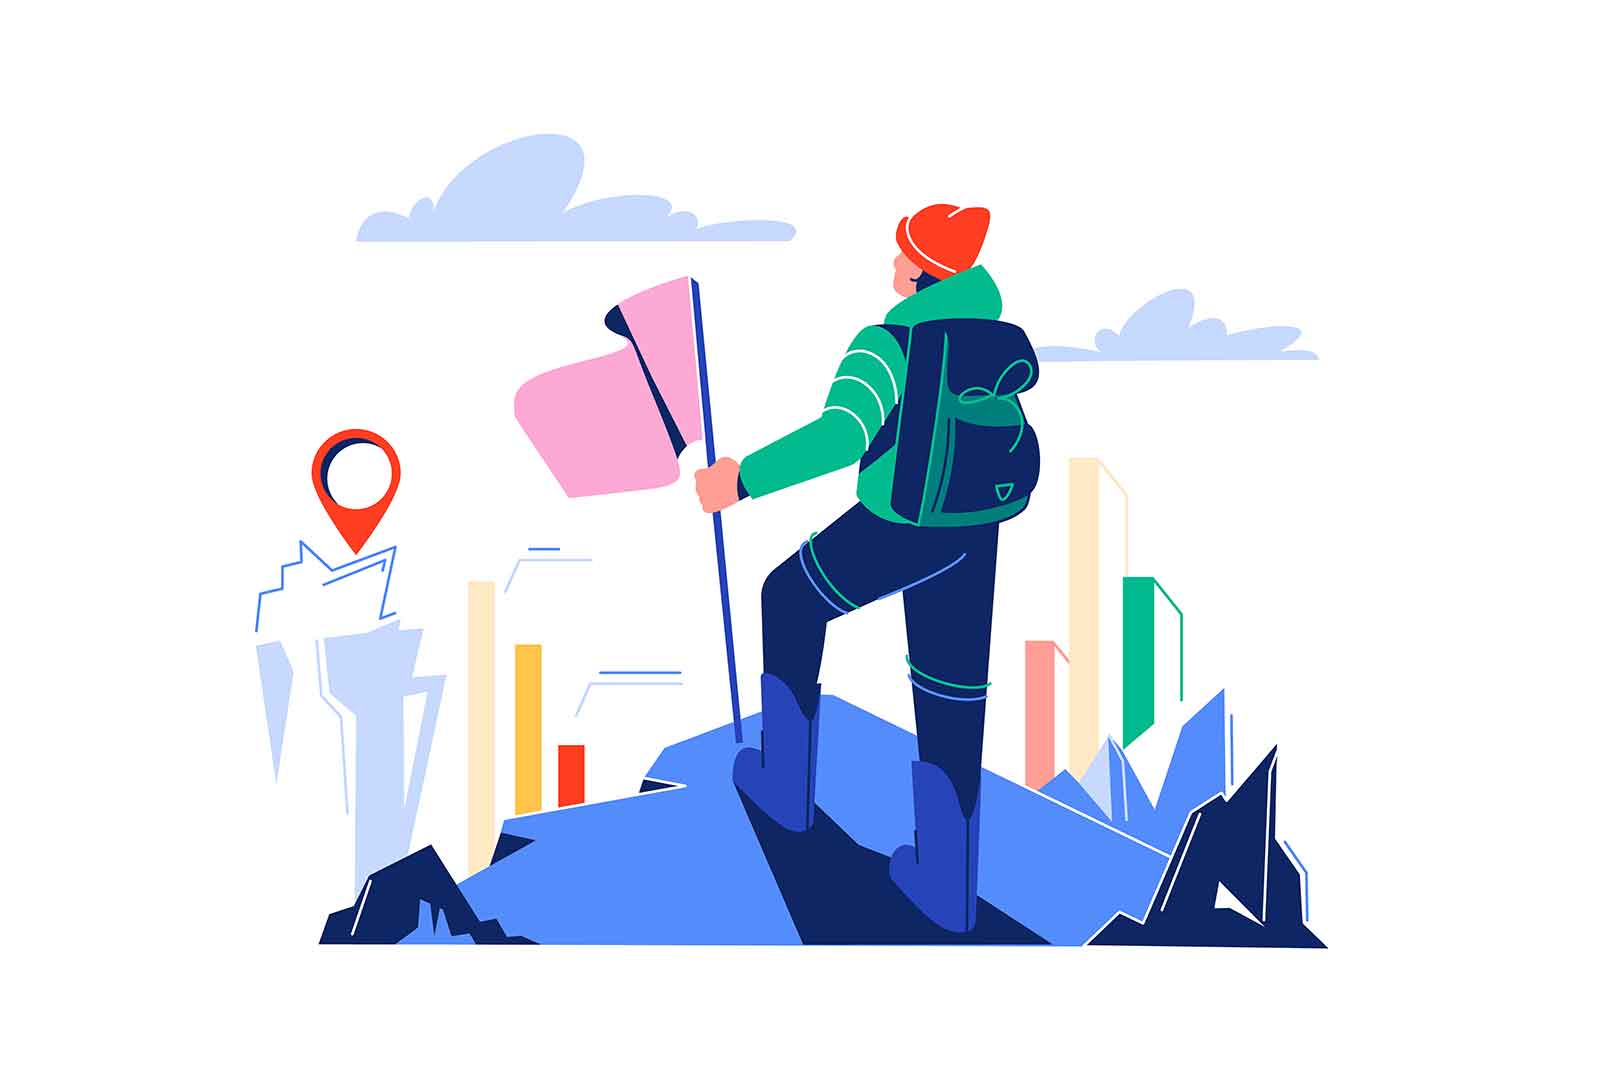 Traveler stands with flag on top of mountain and looks into distance at abstract infographic, vector illustration. Achieving goals concept.